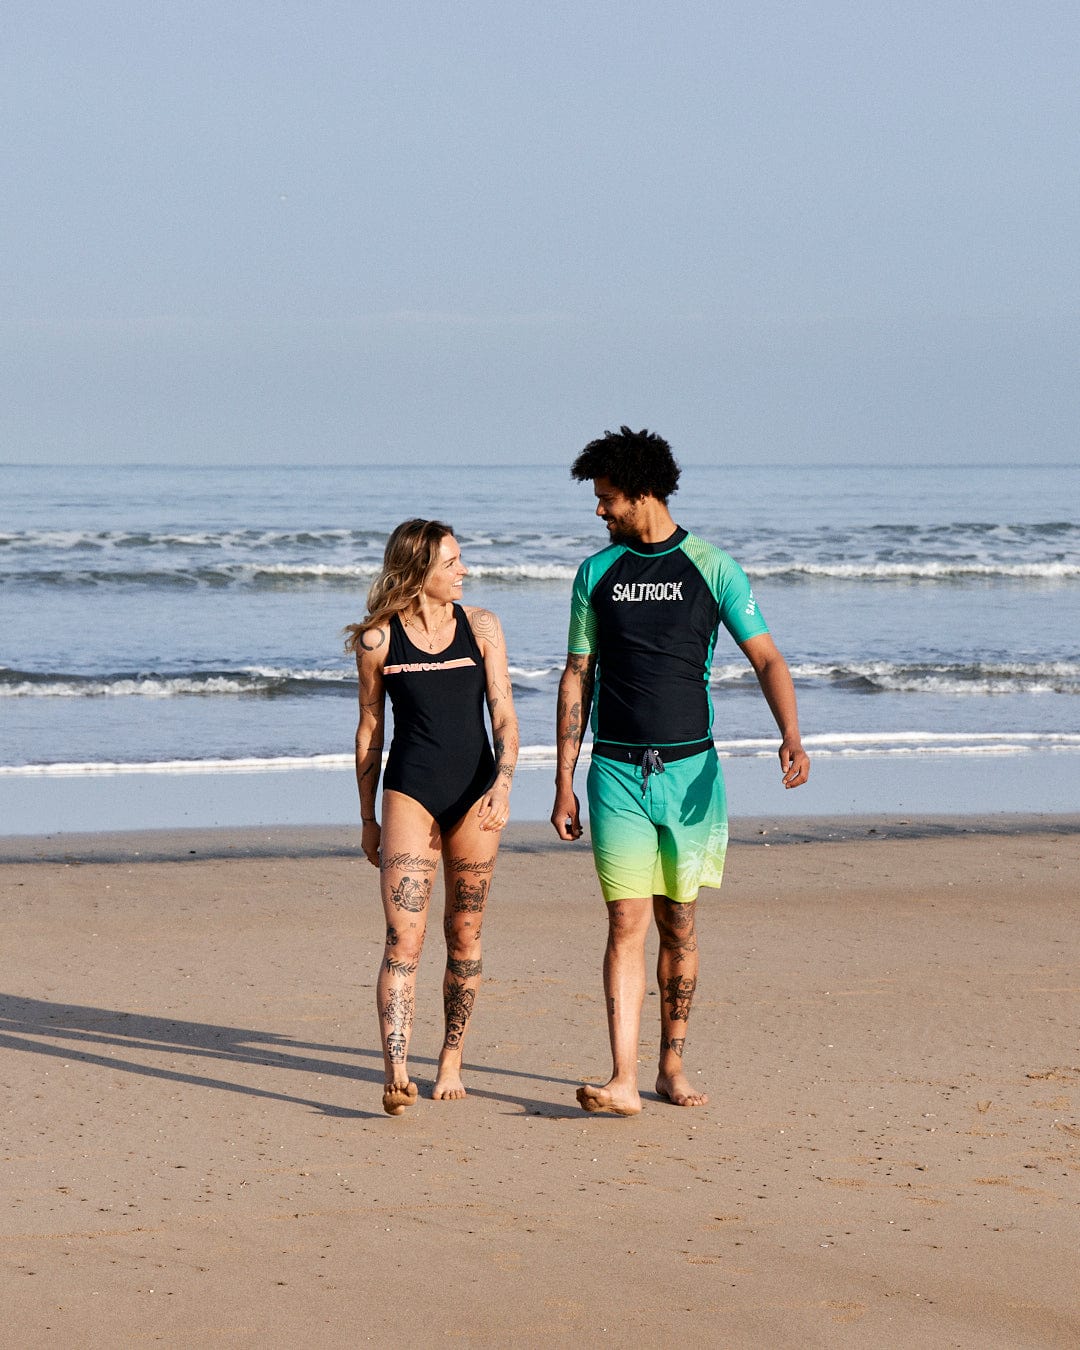 A man and a woman walking on a beach, discussing, both dressed in swimwear including a Corrine Retro - Recycled Womens Swimsuit in Black by Saltrock, with clear skies and calm sea in the background.